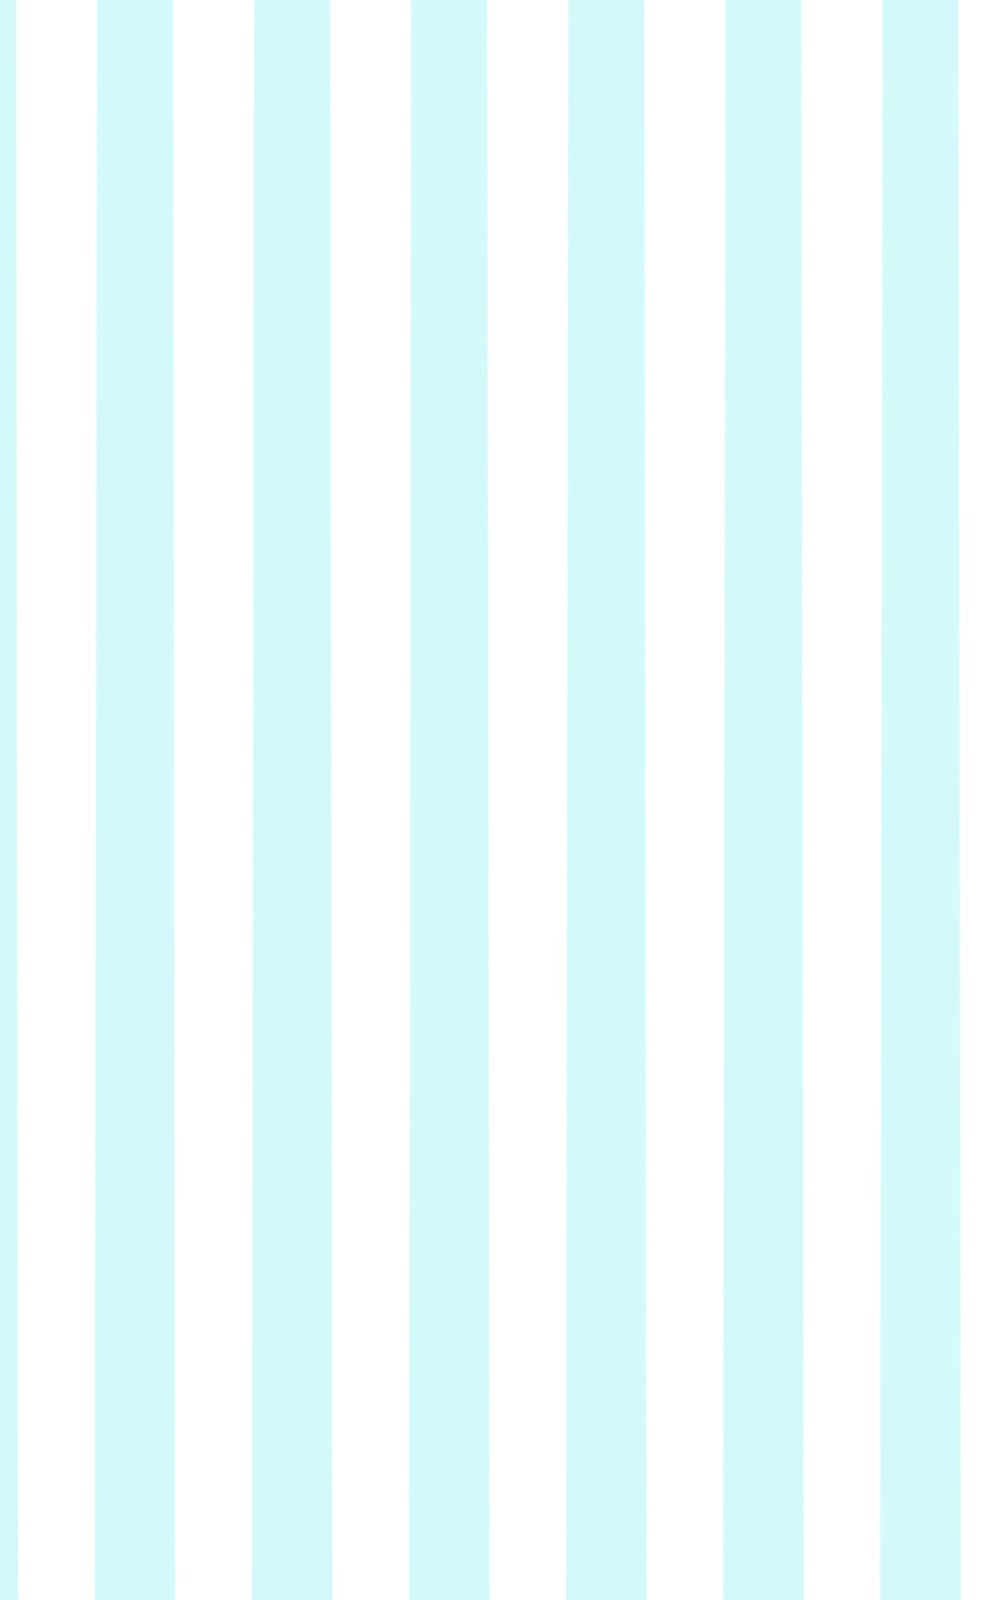 Blue and White Stripes Custom Box Background by DUSKvsDAWN on